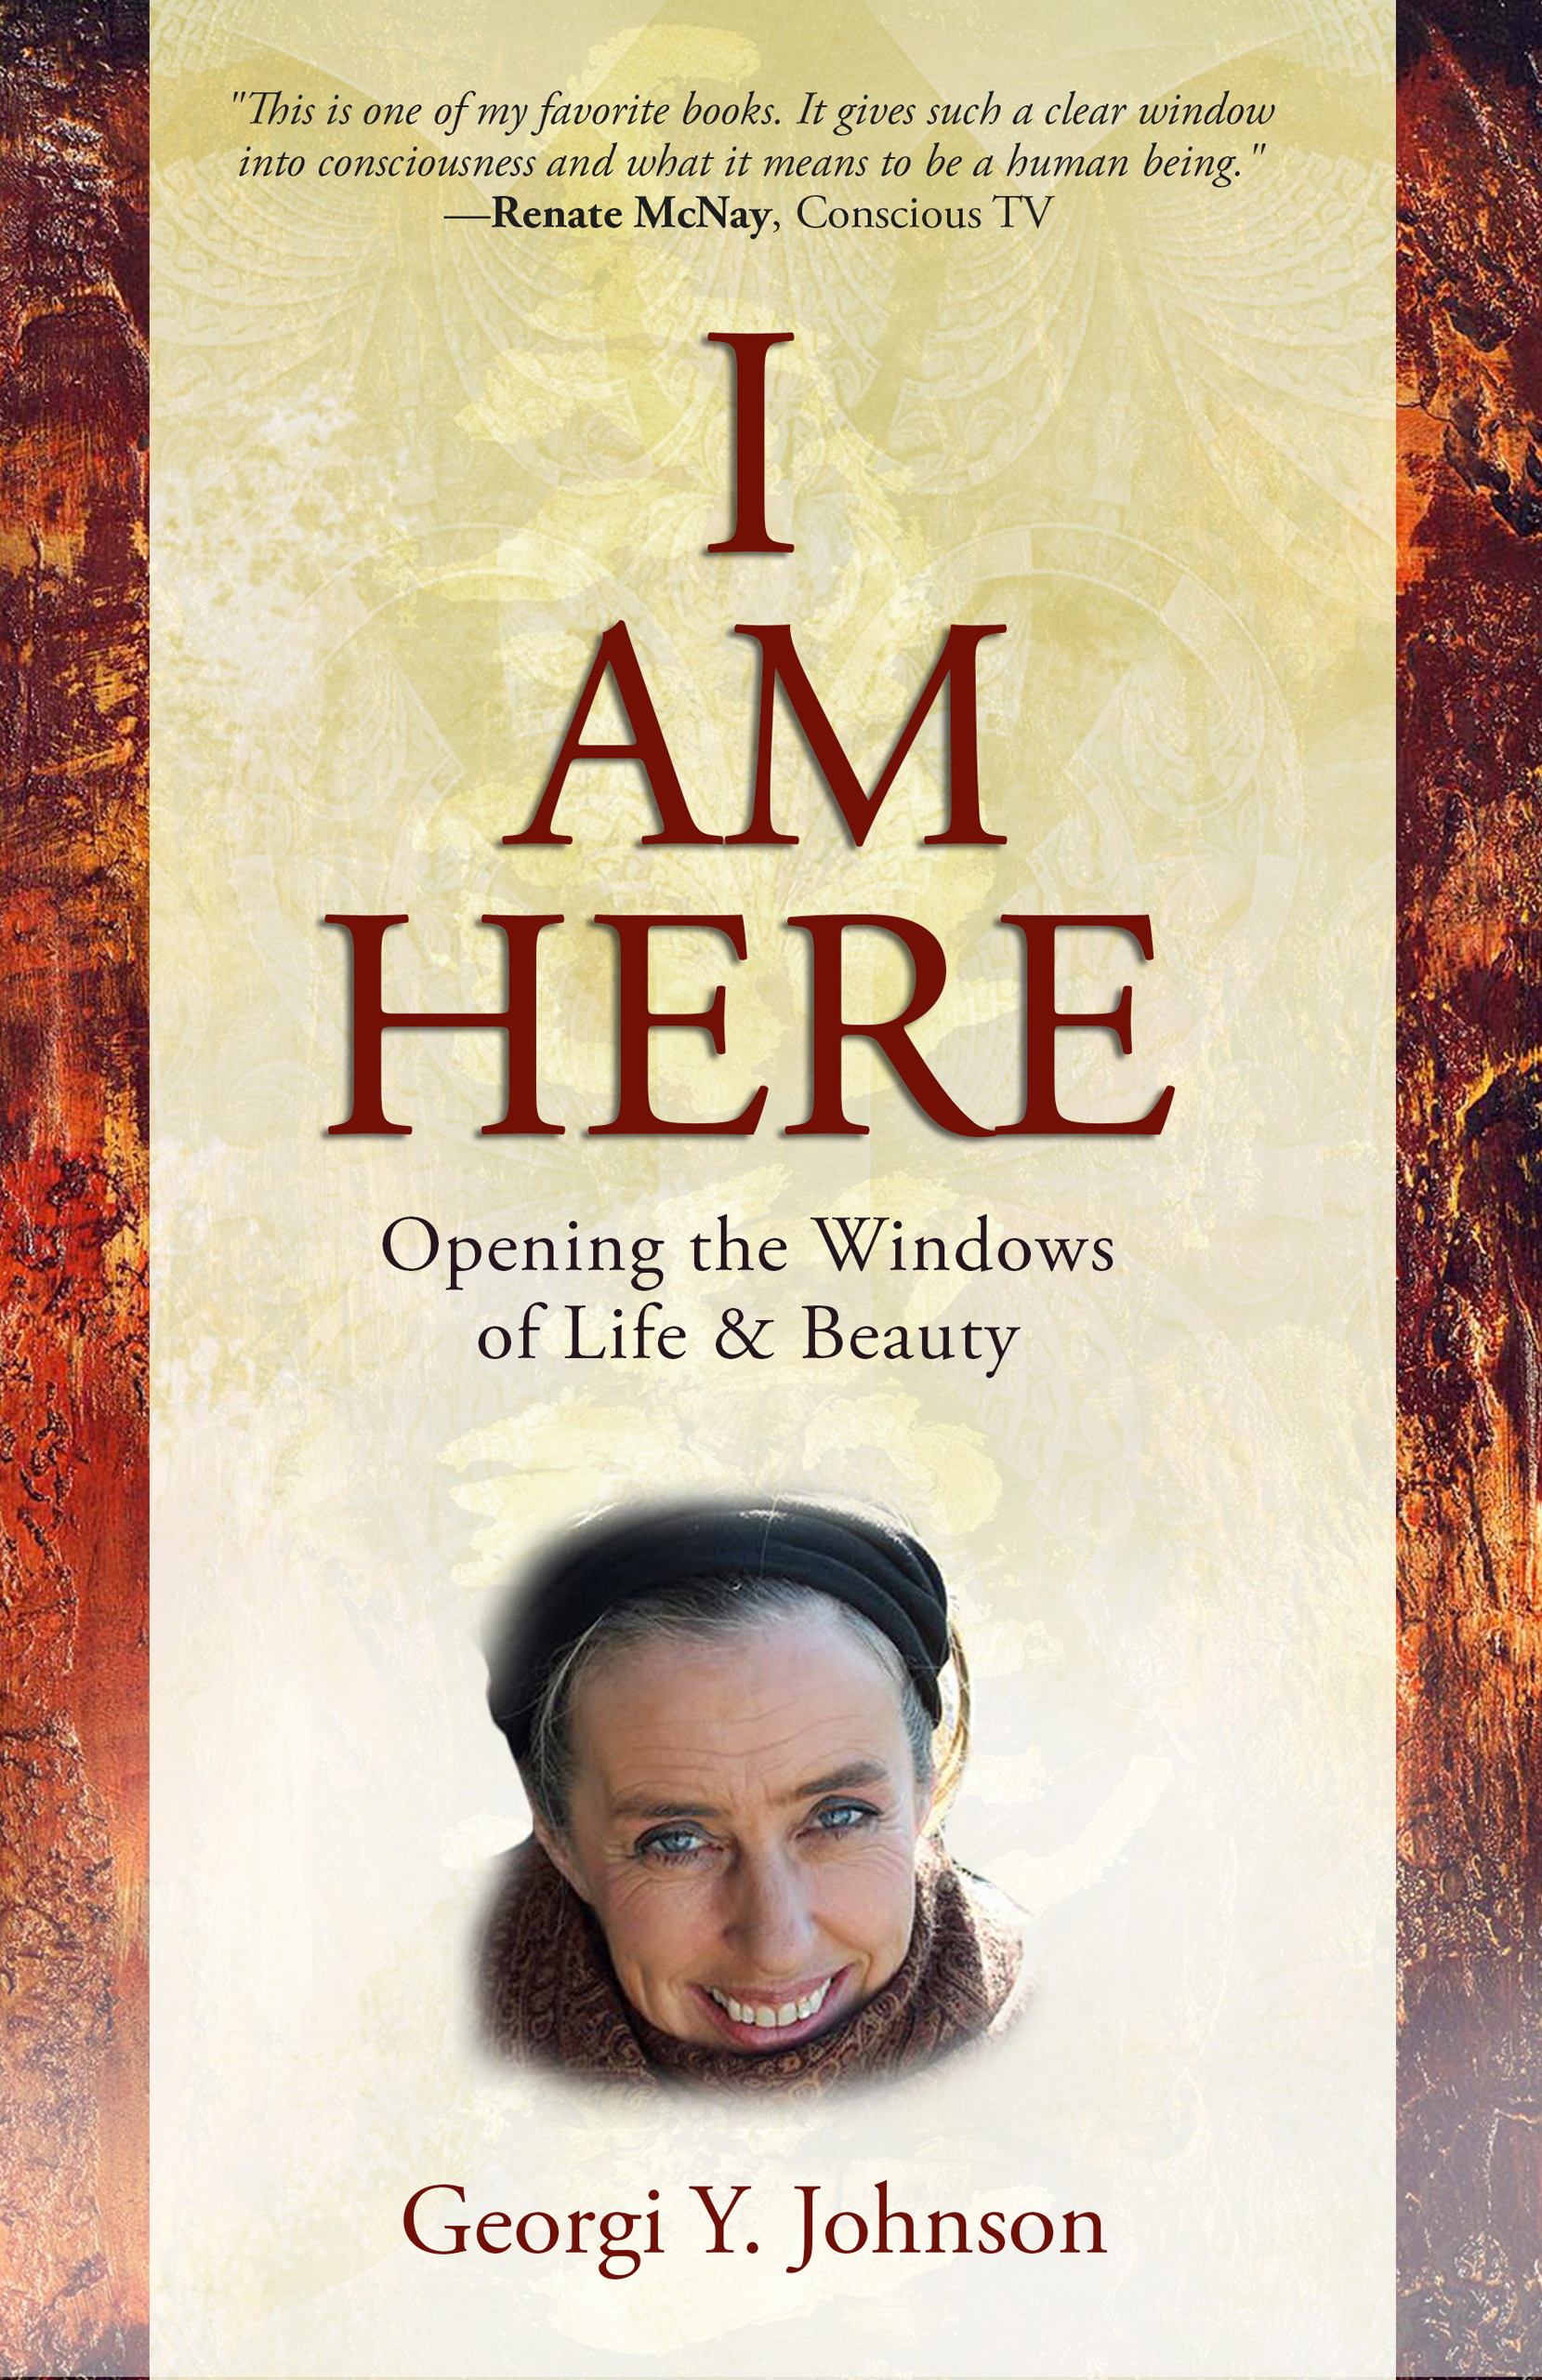 I Am Here - Opening the Windows of Life & Beauty, by Georgi Y. Johnson